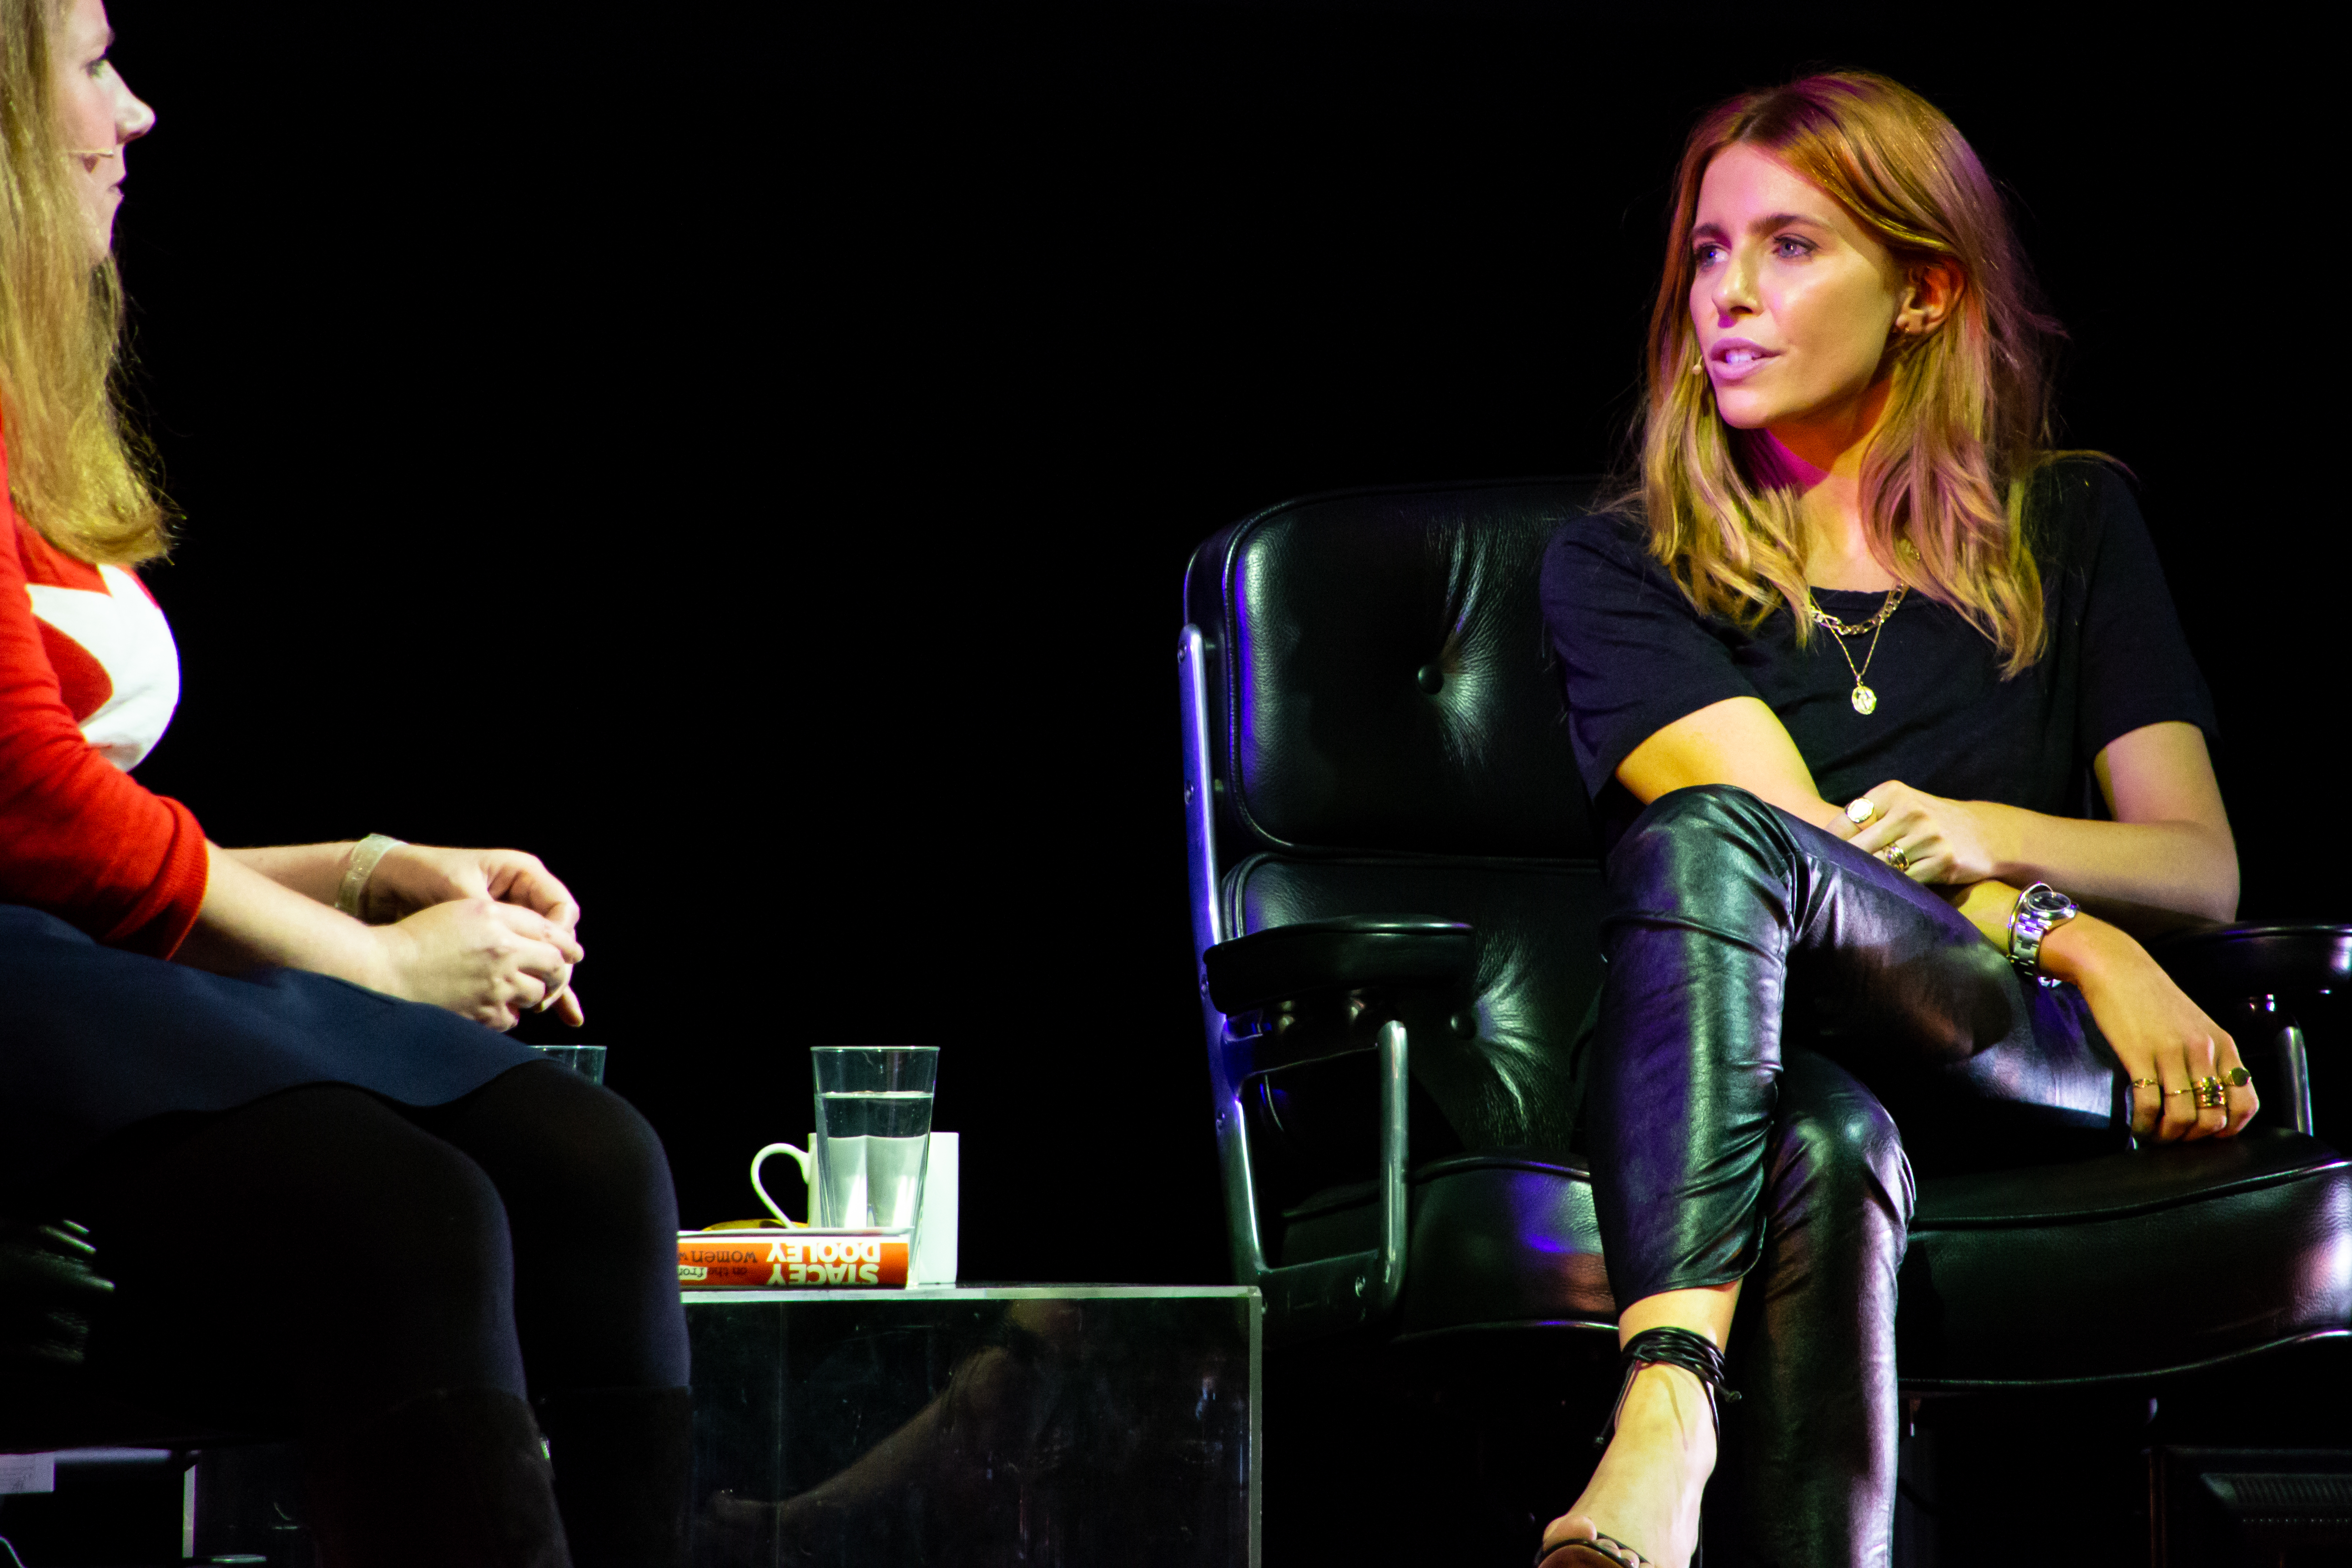 Stacey Dooley on stage